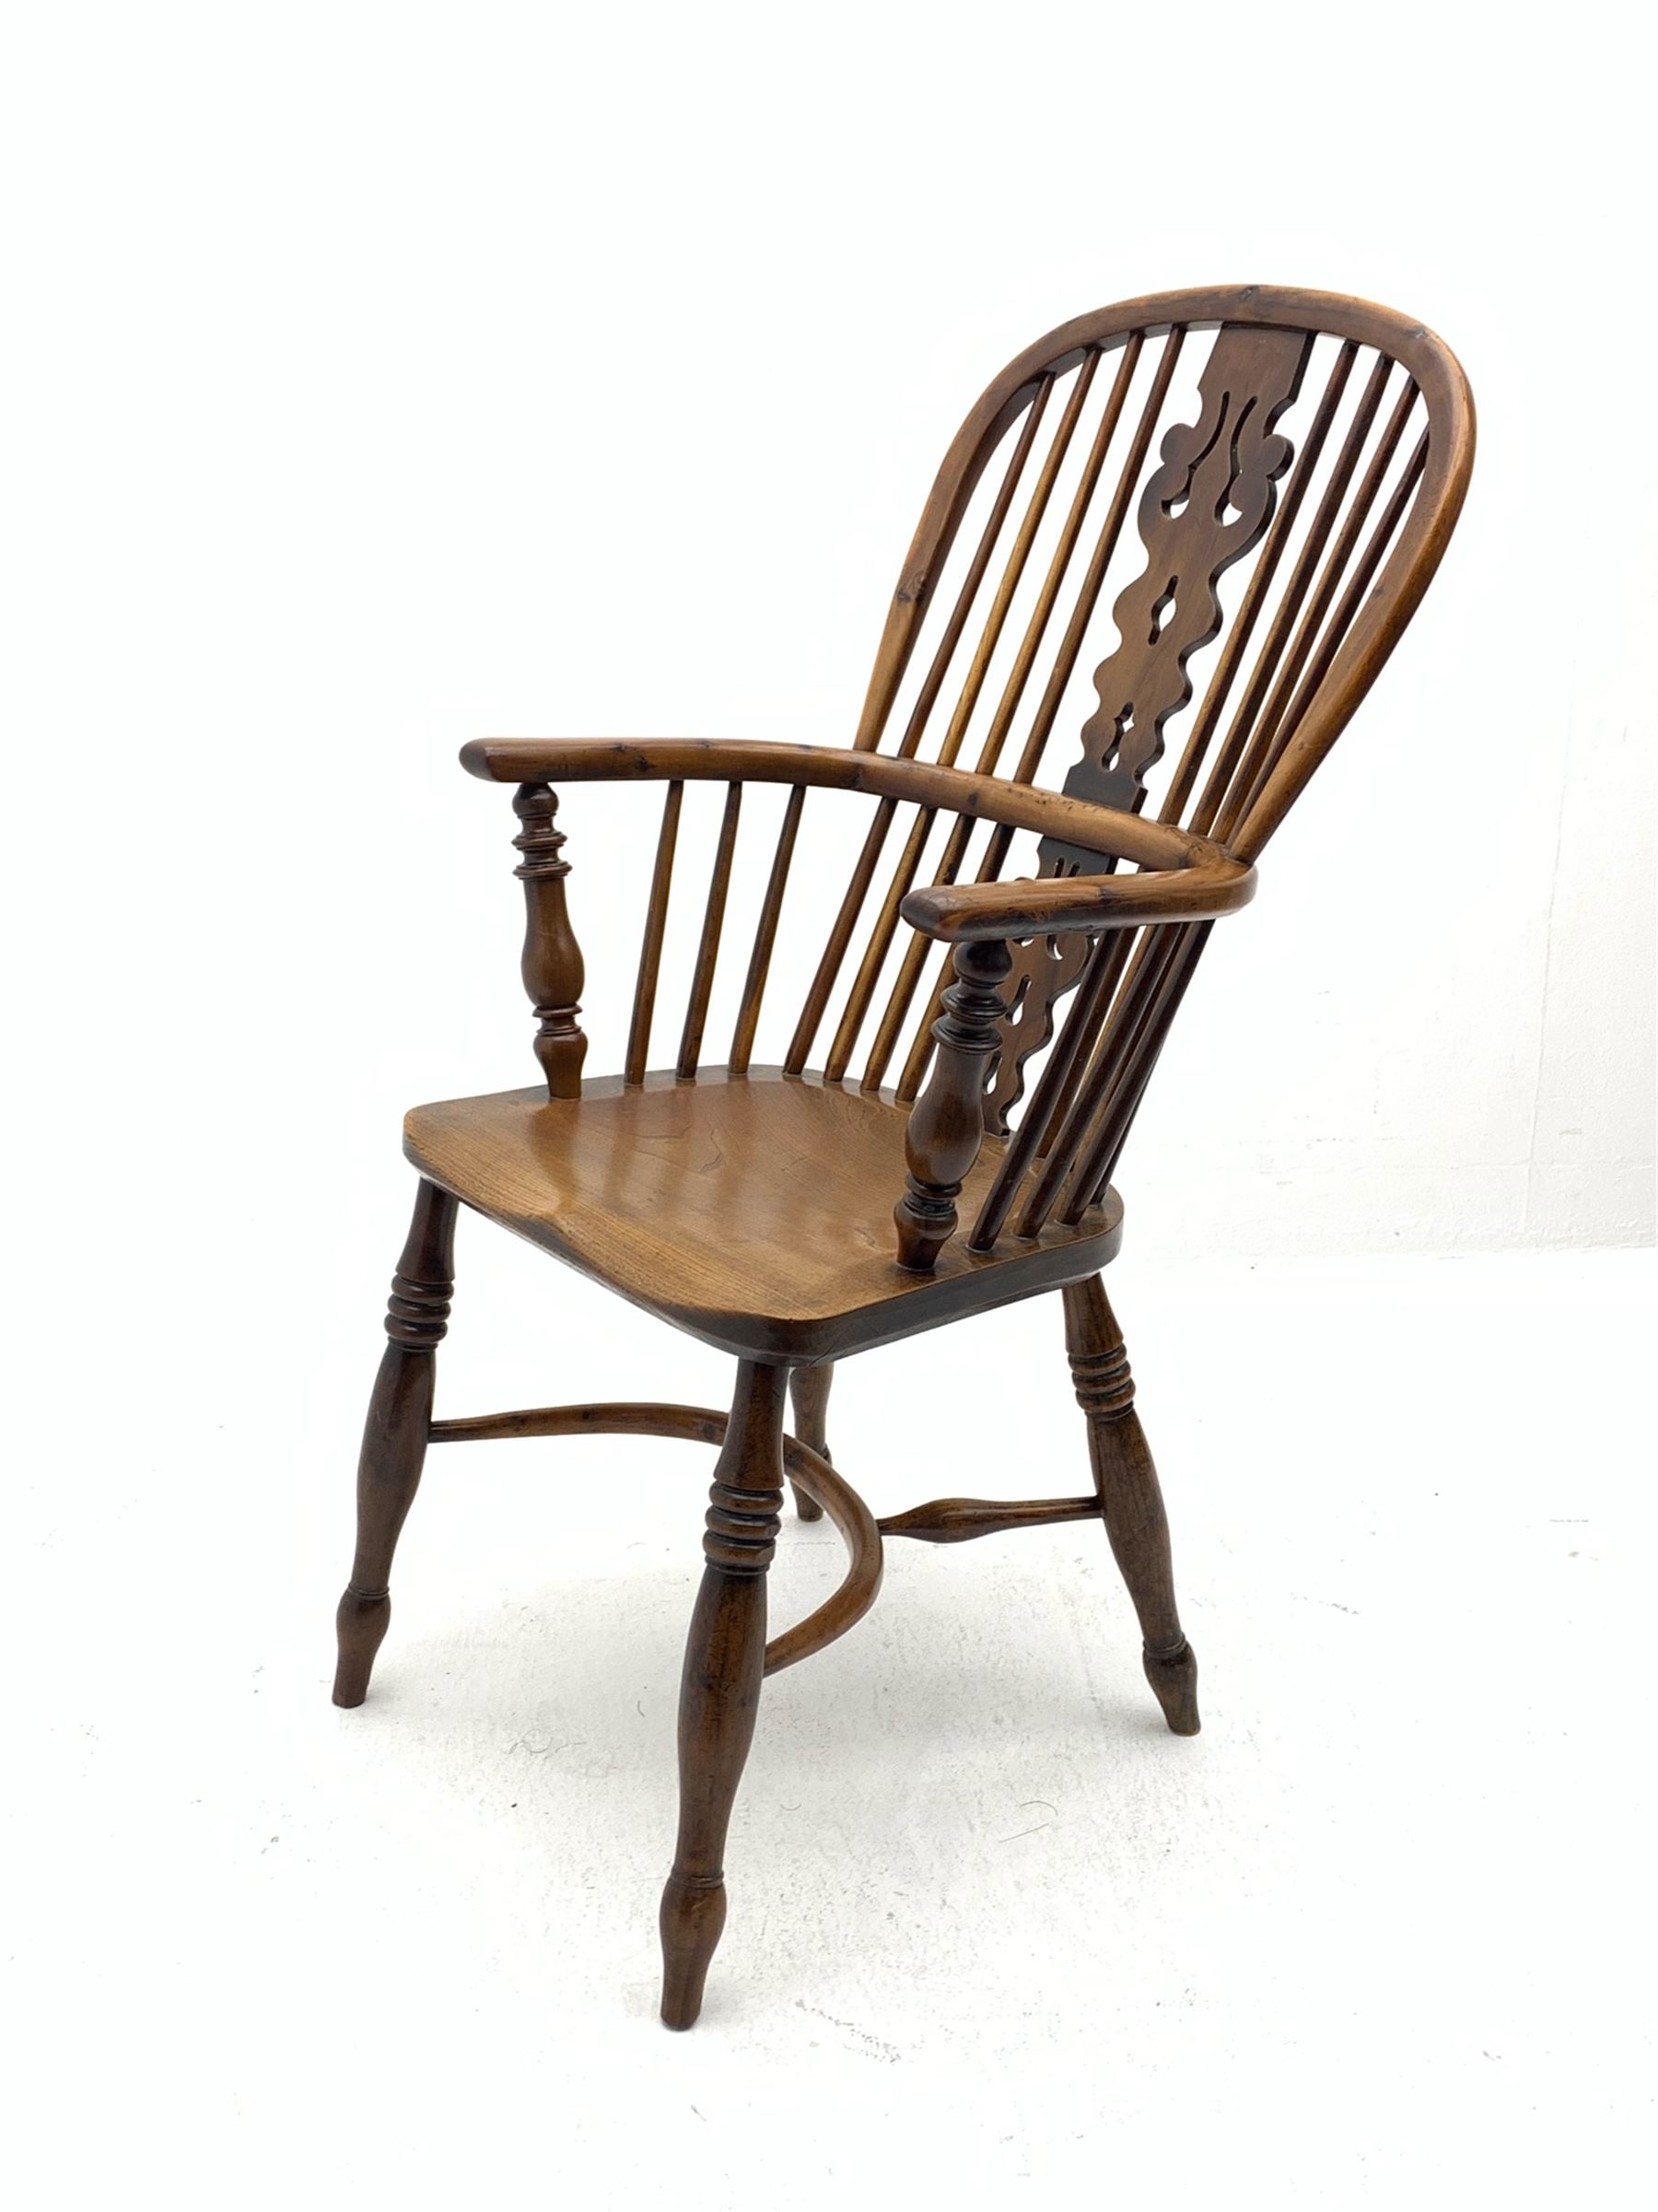 Early 19th century elm and yew wood double hoop Windsor armchair - Image 4 of 7